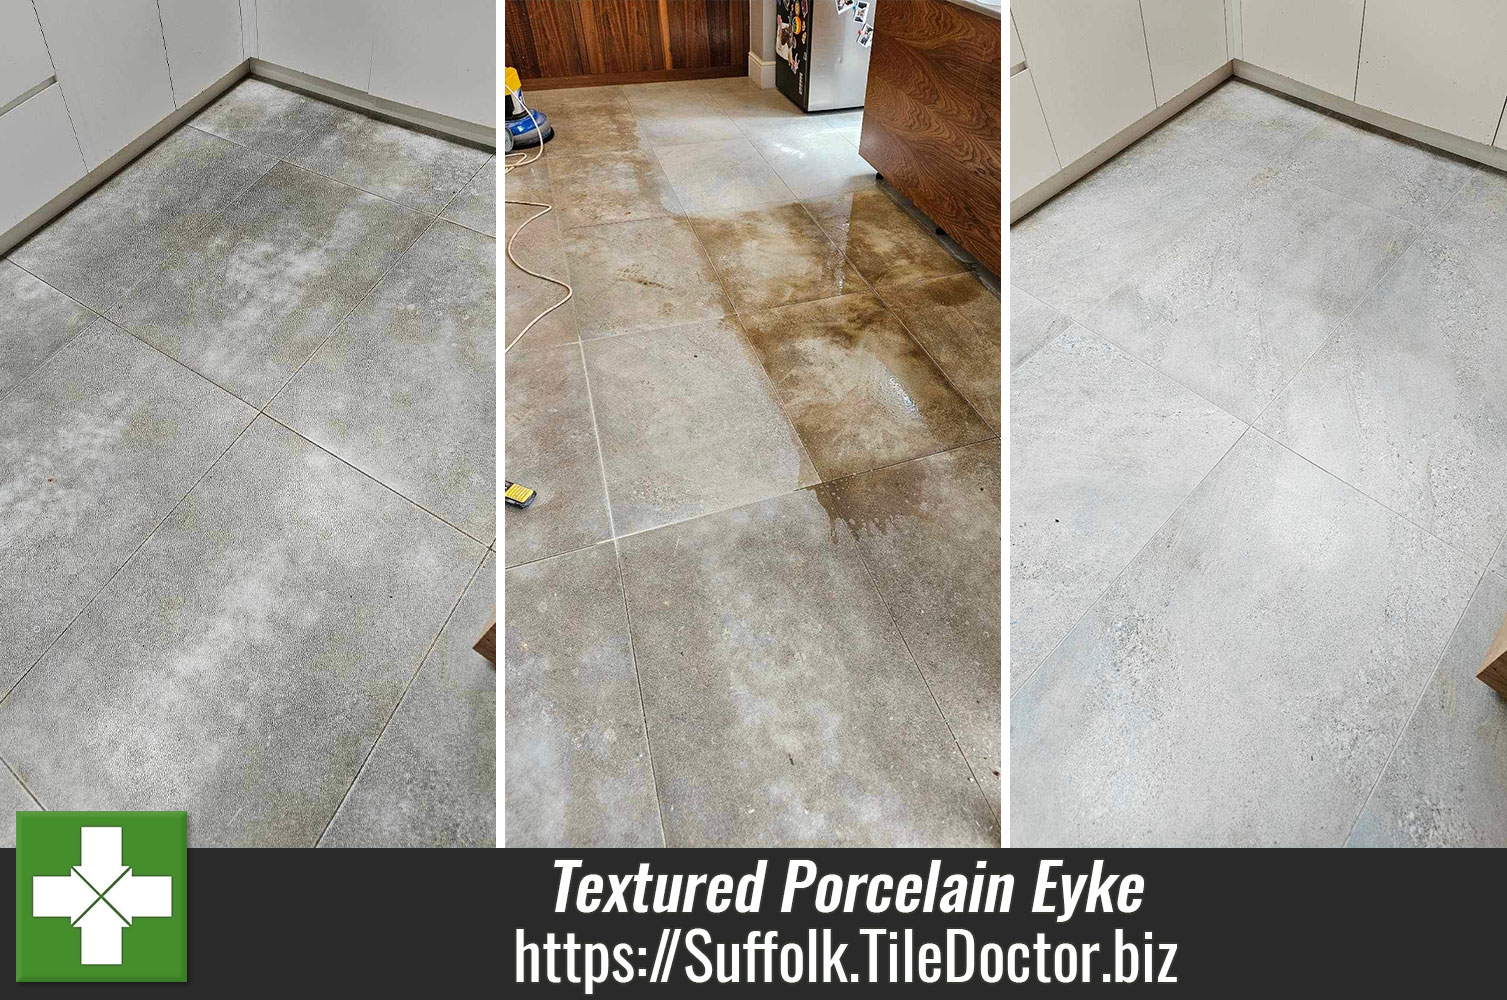 Deep Cleaning Textured Porcelain Tile and Grout in Eyke